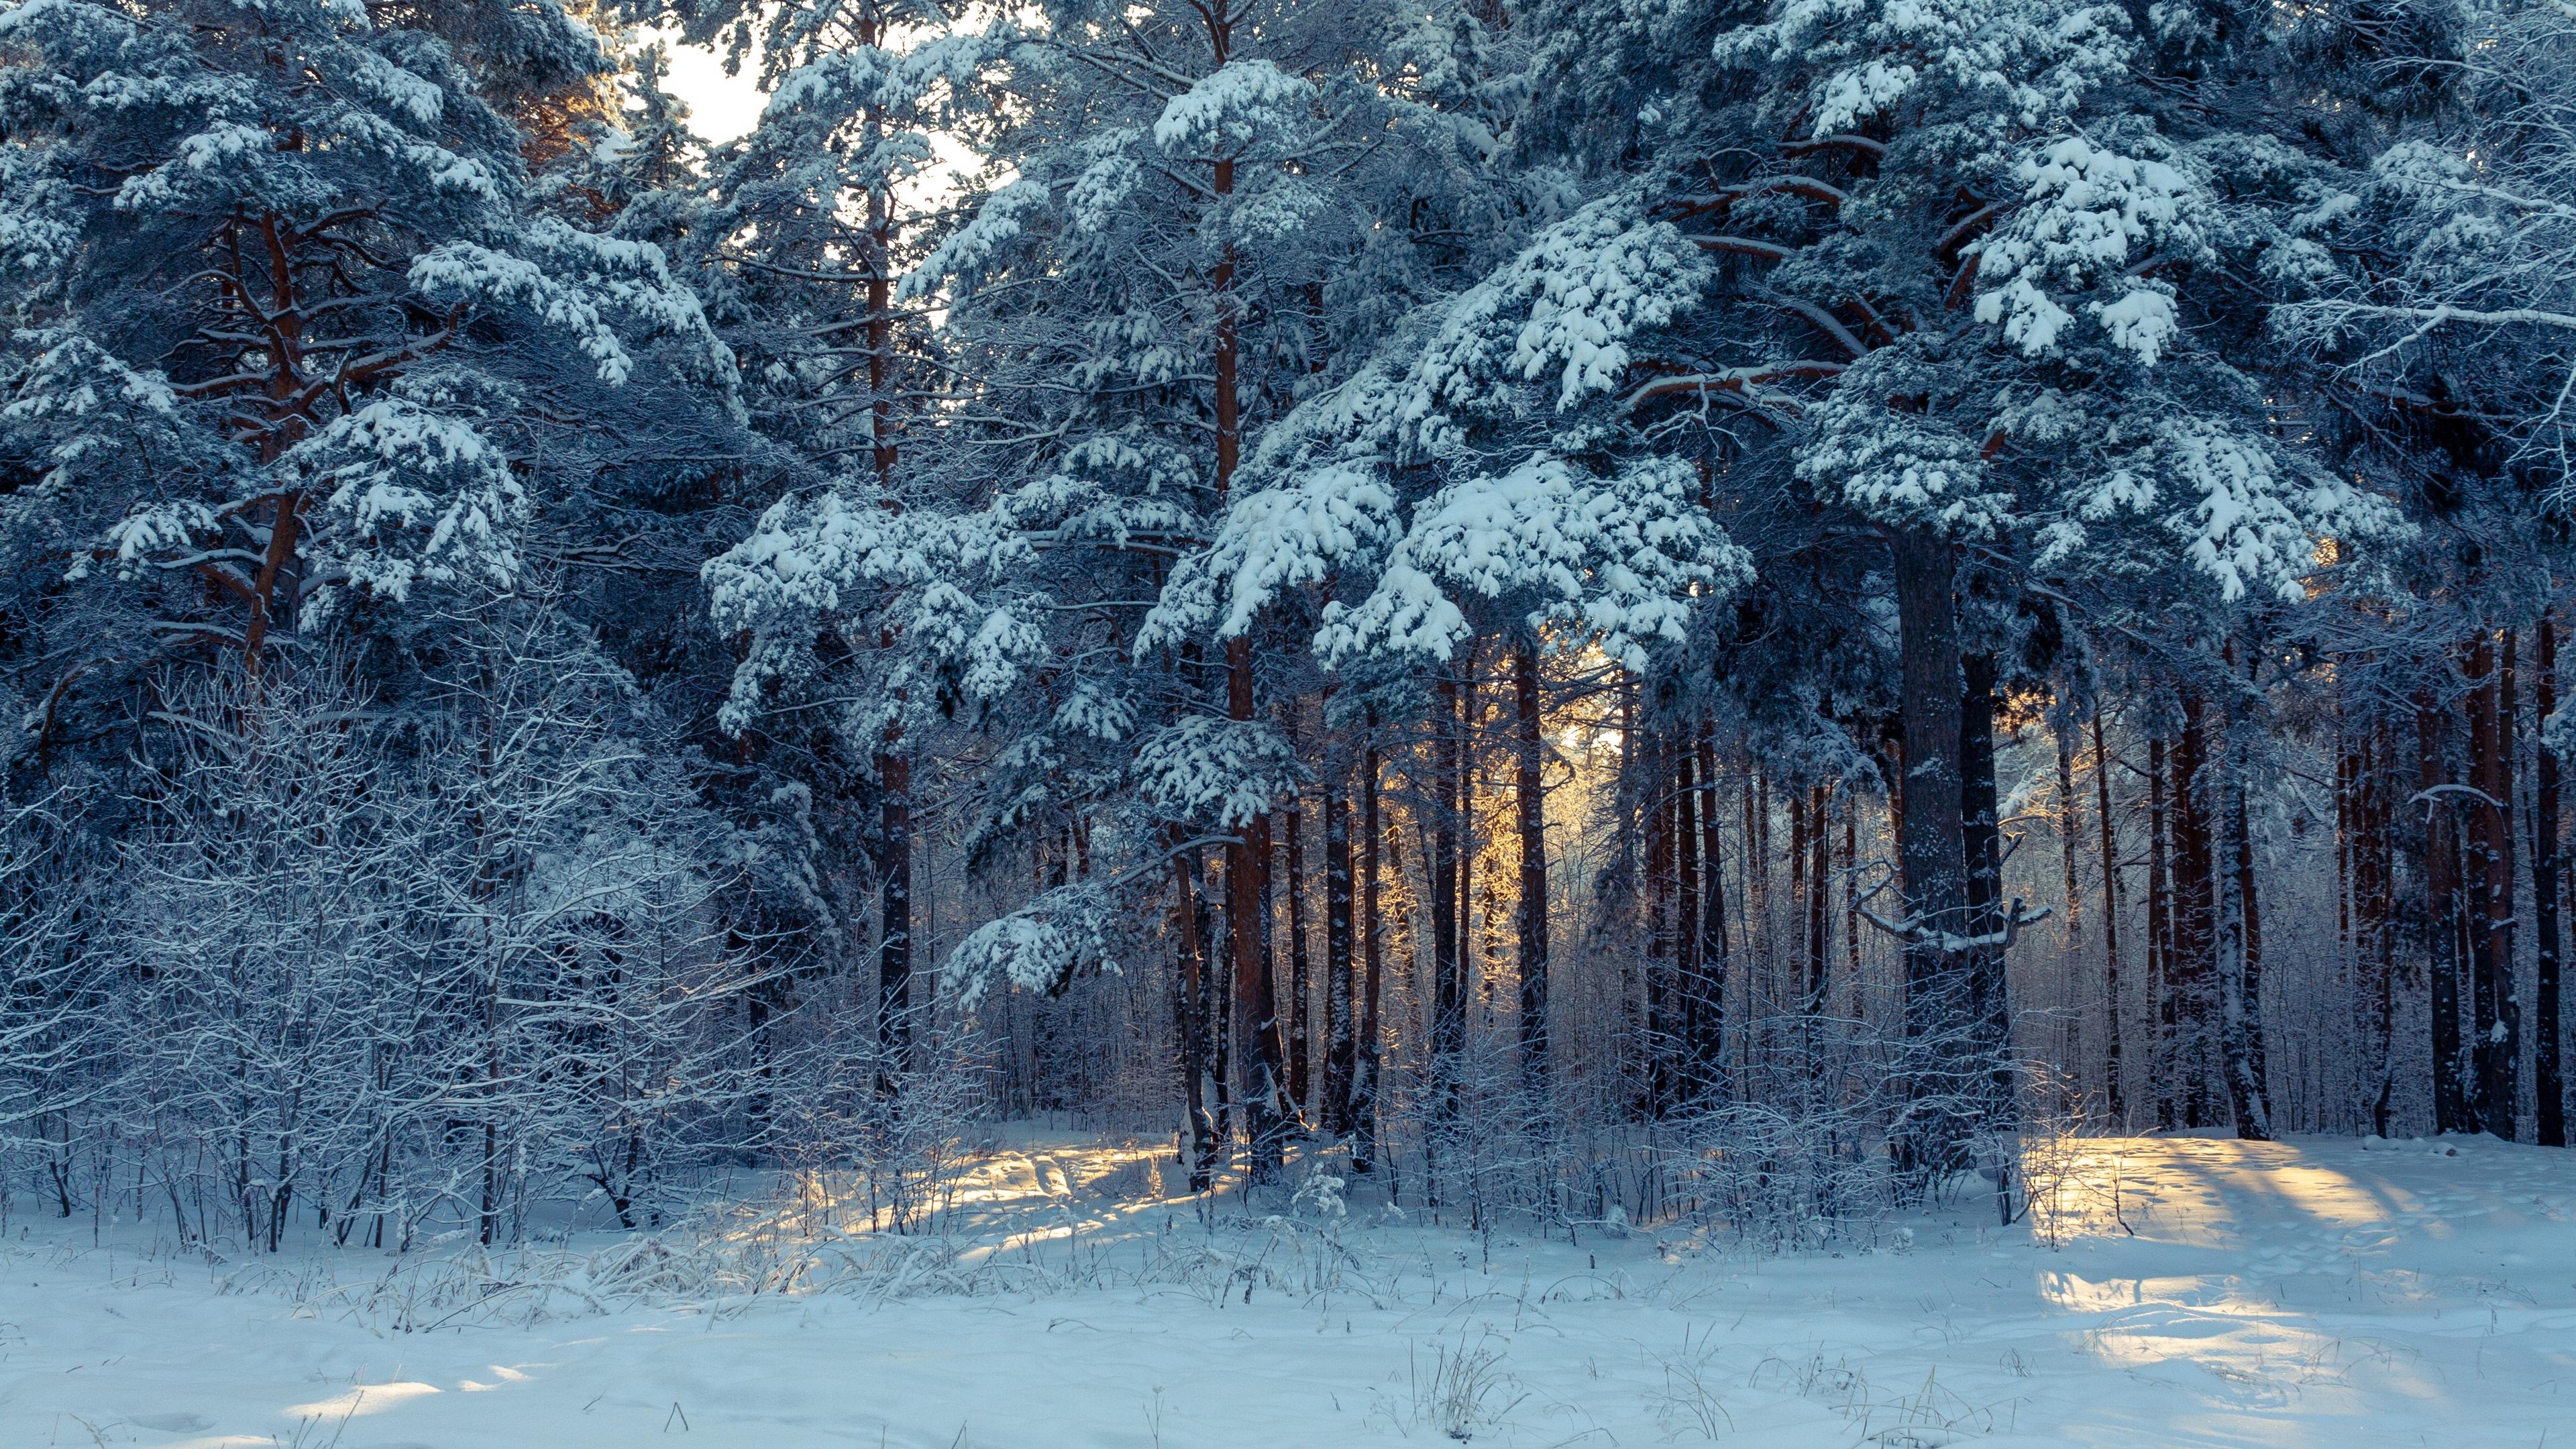 Download wallpaper 3840x2160 forest, winter, snow, trees